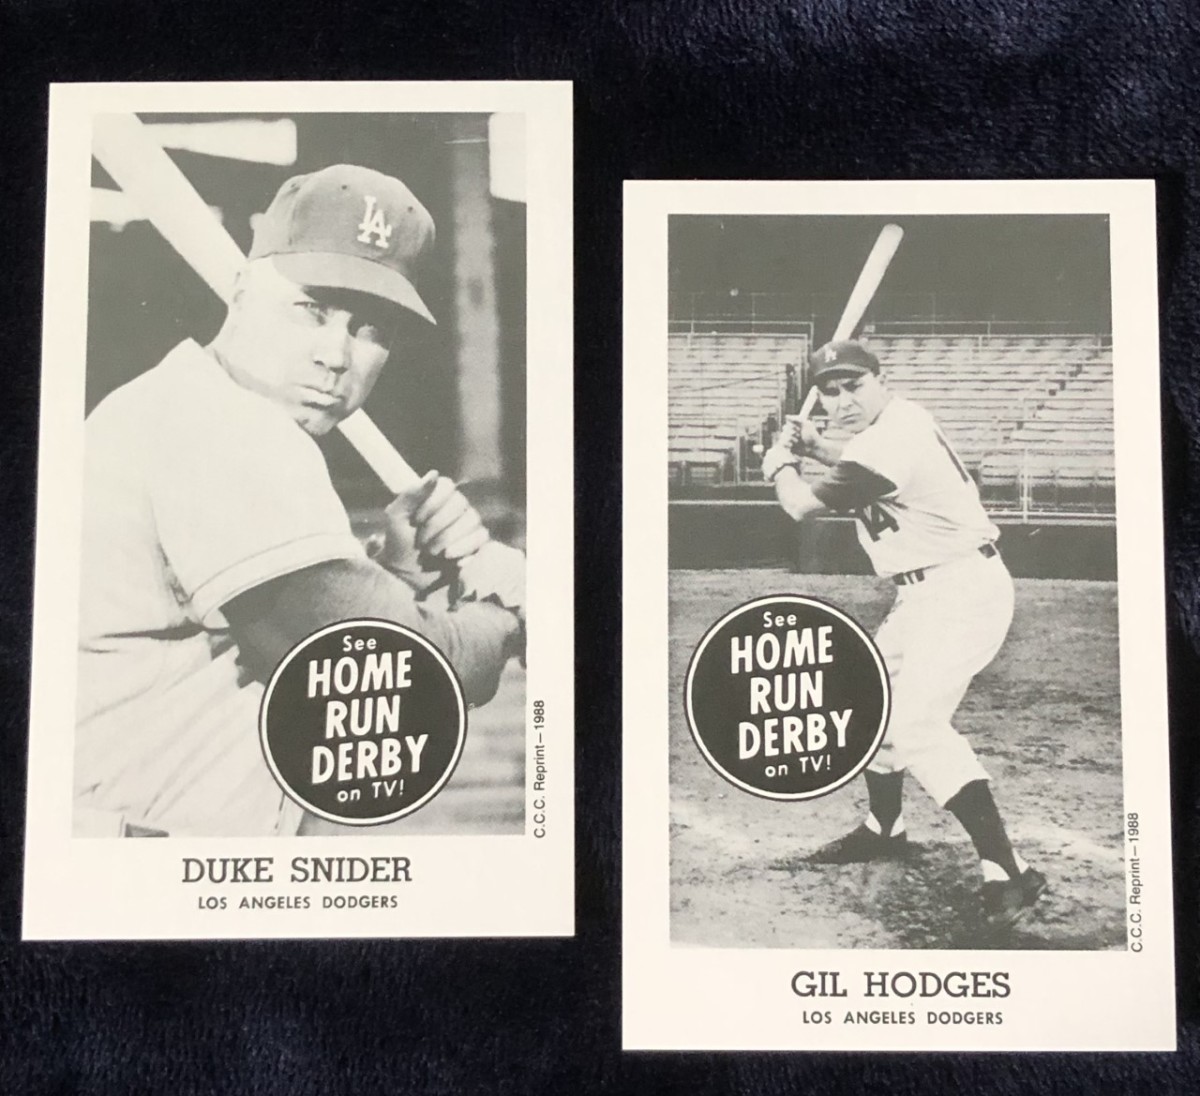 1959 Home Run Derby cards featuring Duke Snider and Gil Hodges.